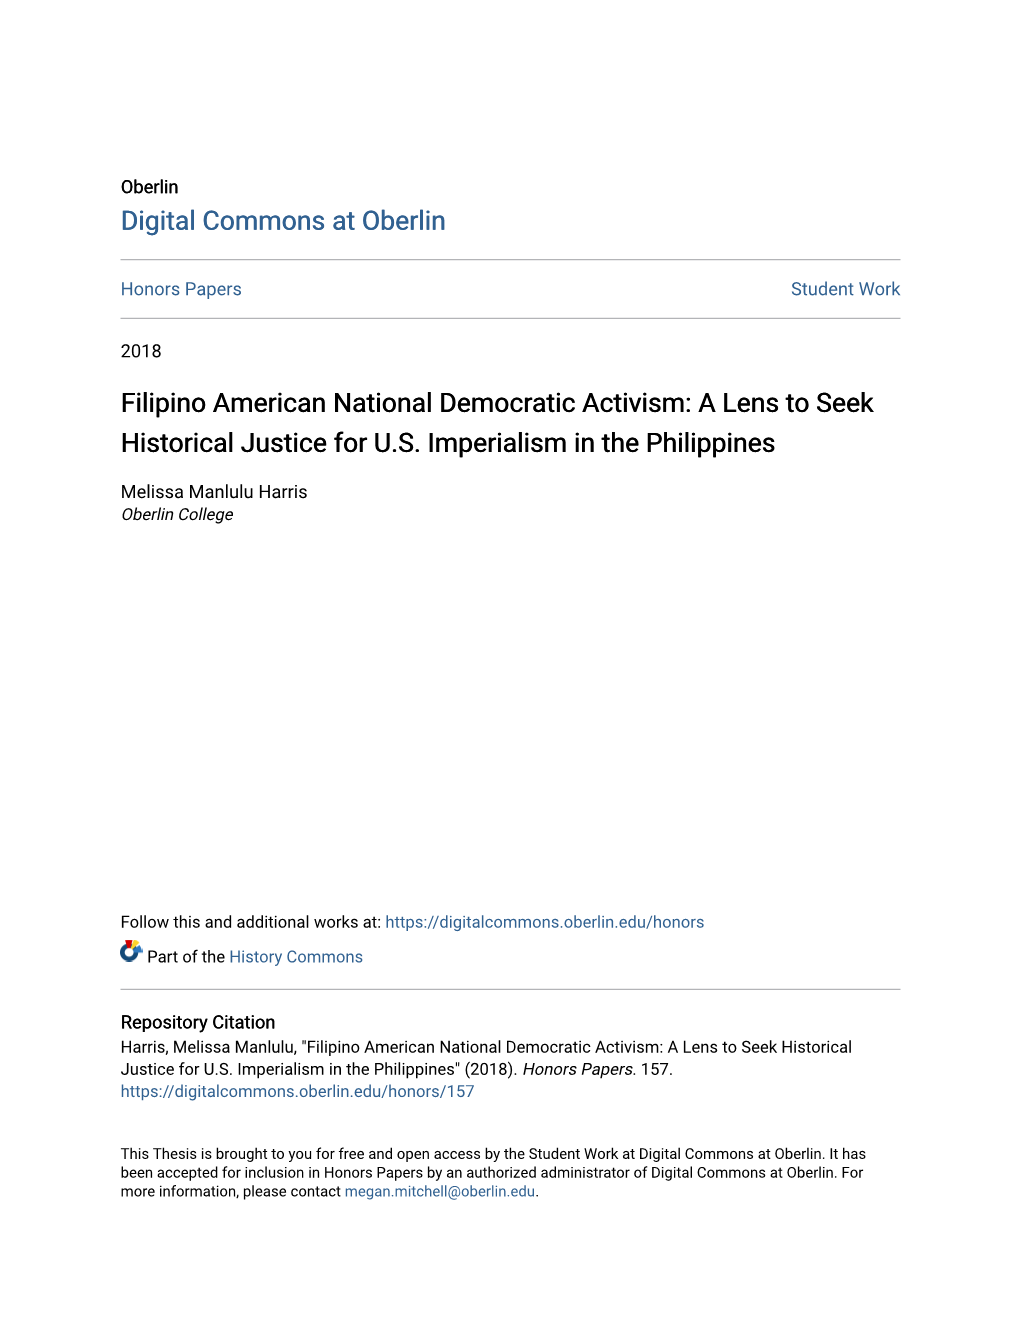 Filipino American National Democratic Activism: a Lens to Seek Historical Justice for U.S